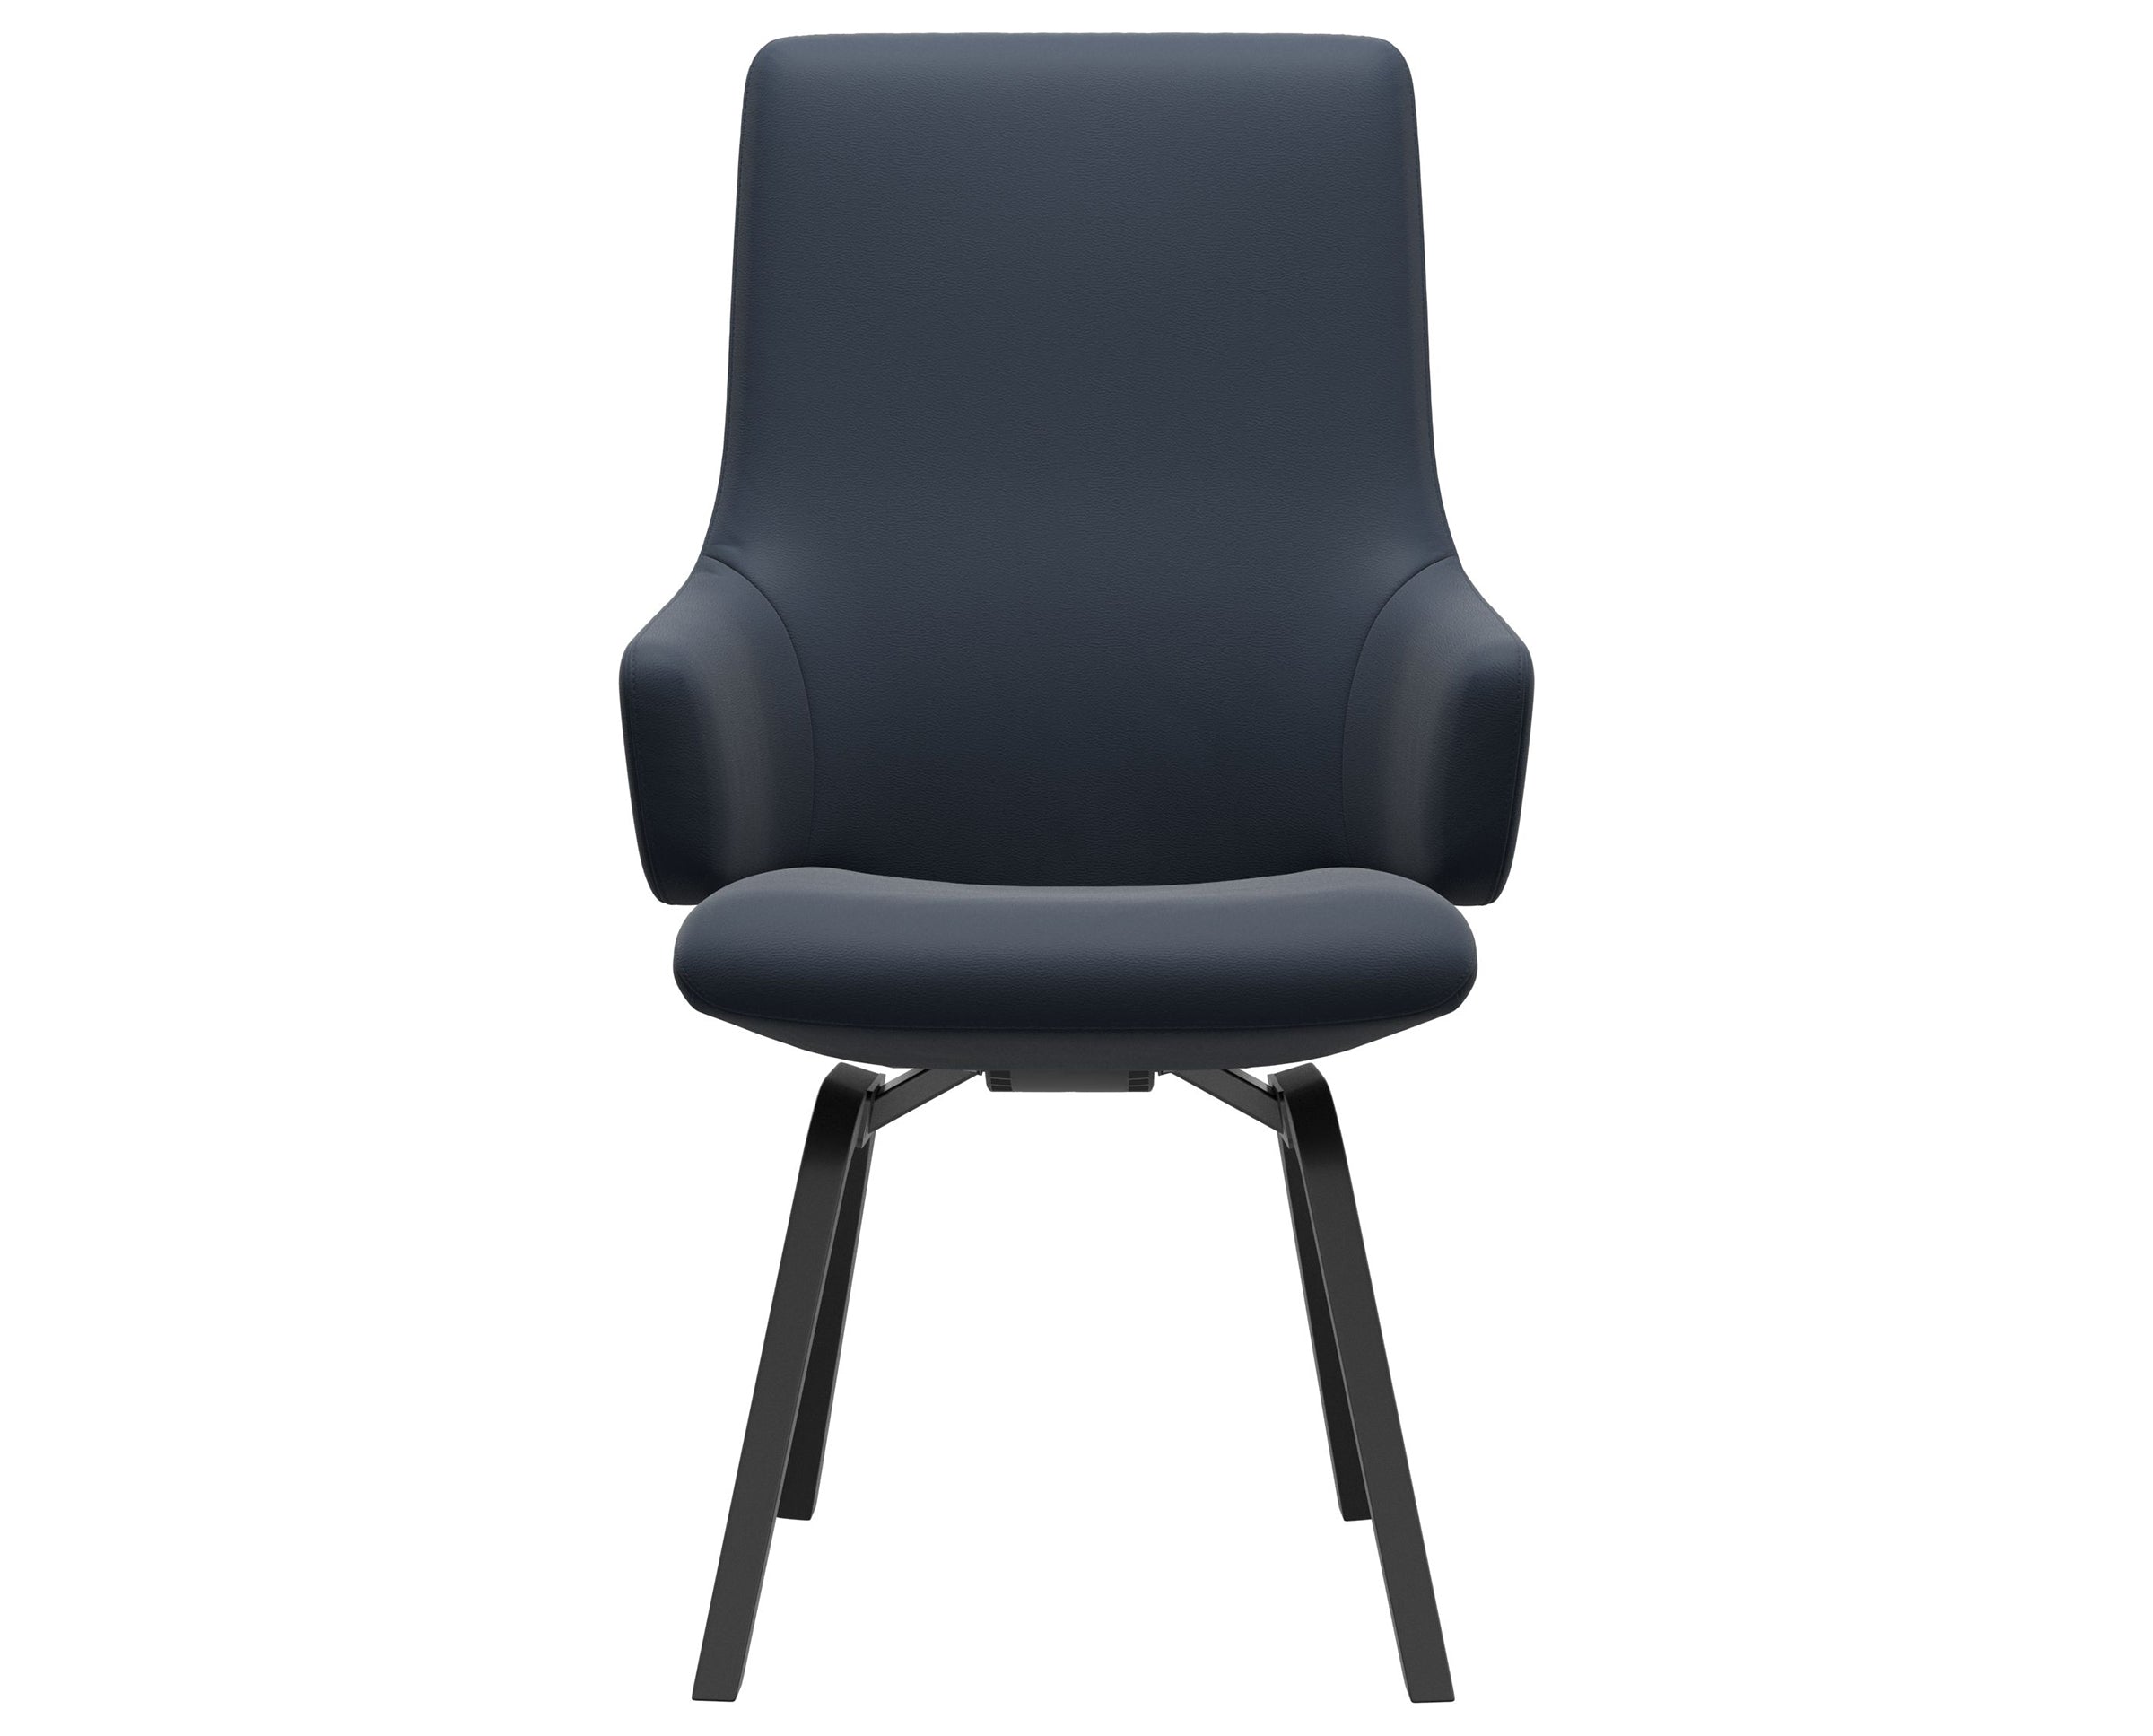 Paloma Leather Oxford Blue and Black Base | Stressless Laurel High Back D200 Dining Chair w/Arms | Valley Ridge Furniture